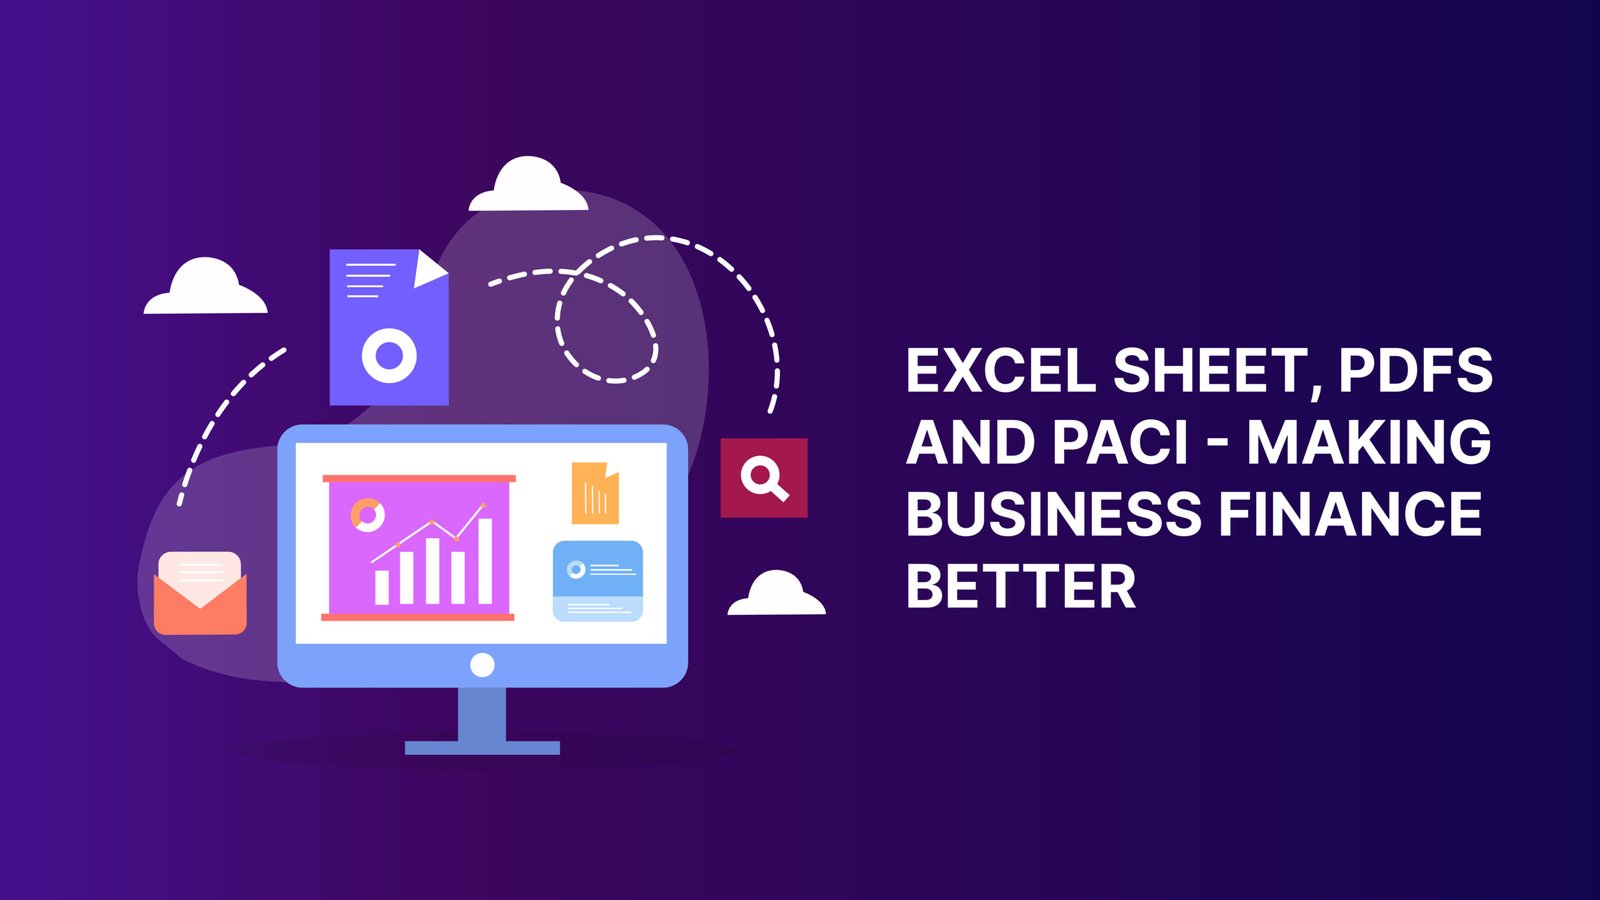 Excel sheets, PDFs, and Paci: Making Business Finance Better